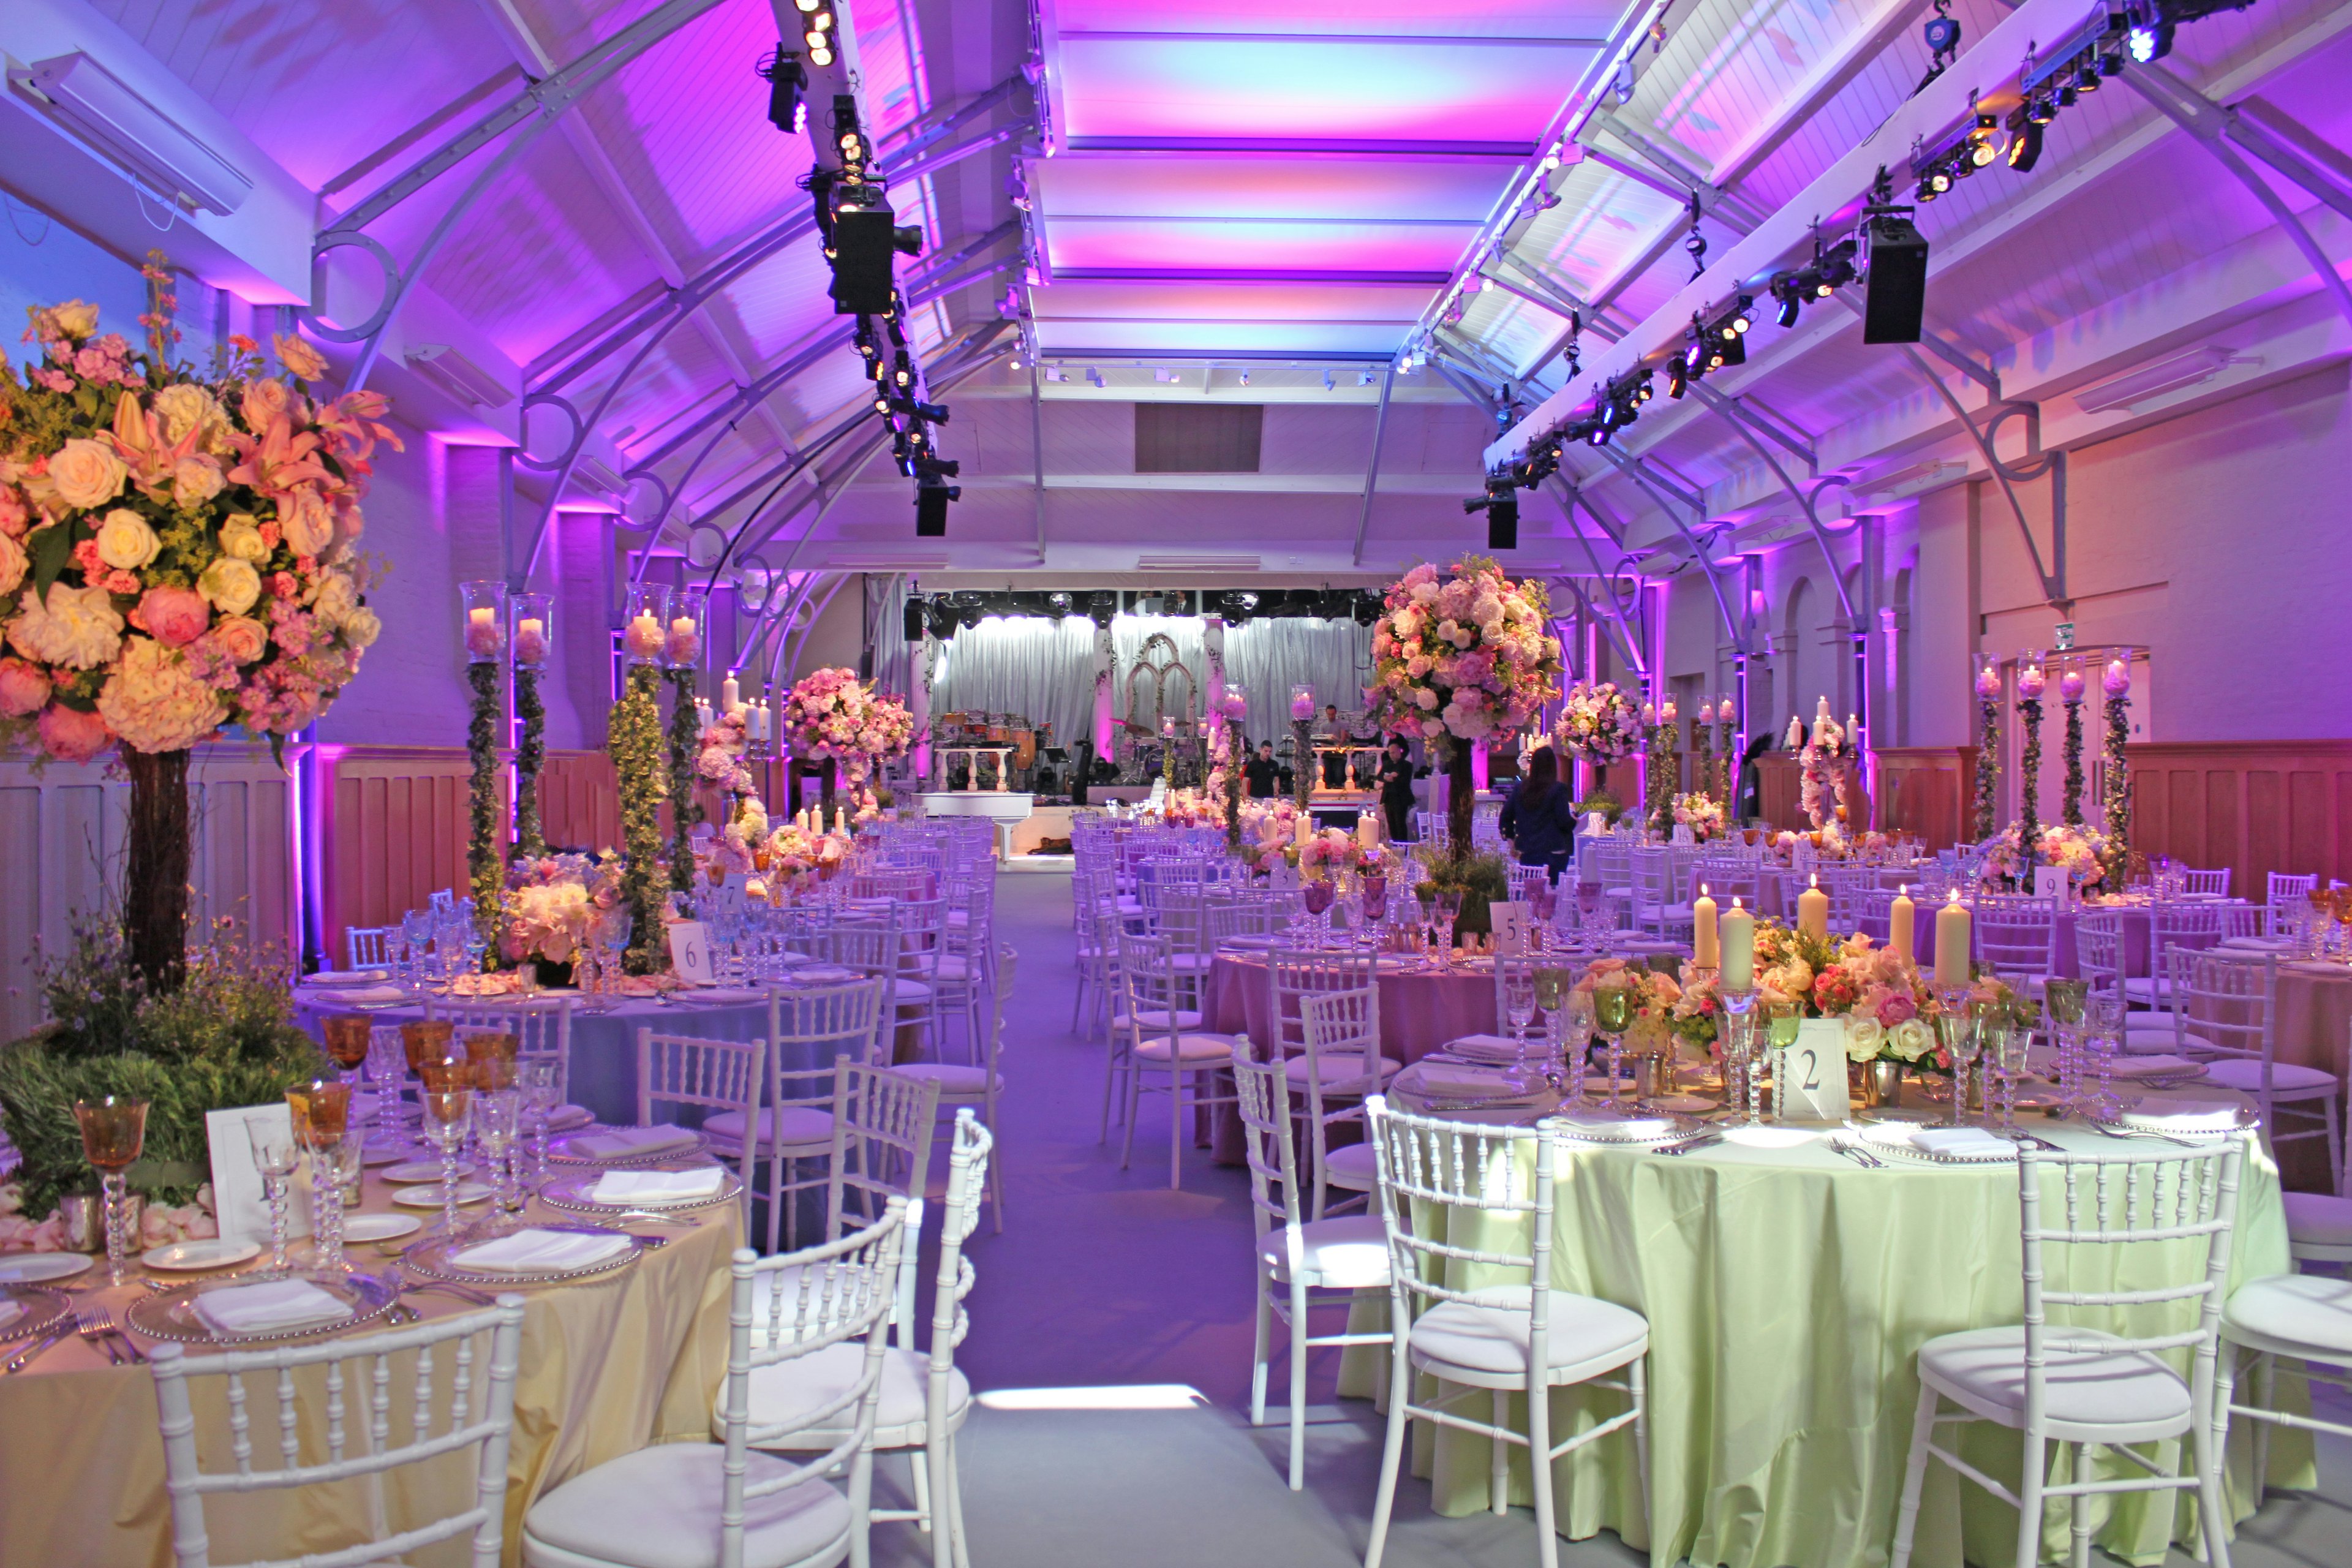 Wedding Venues - The HAC (Honourable Artillery Company) - Weddings in Prince Consort Rooms - Banner